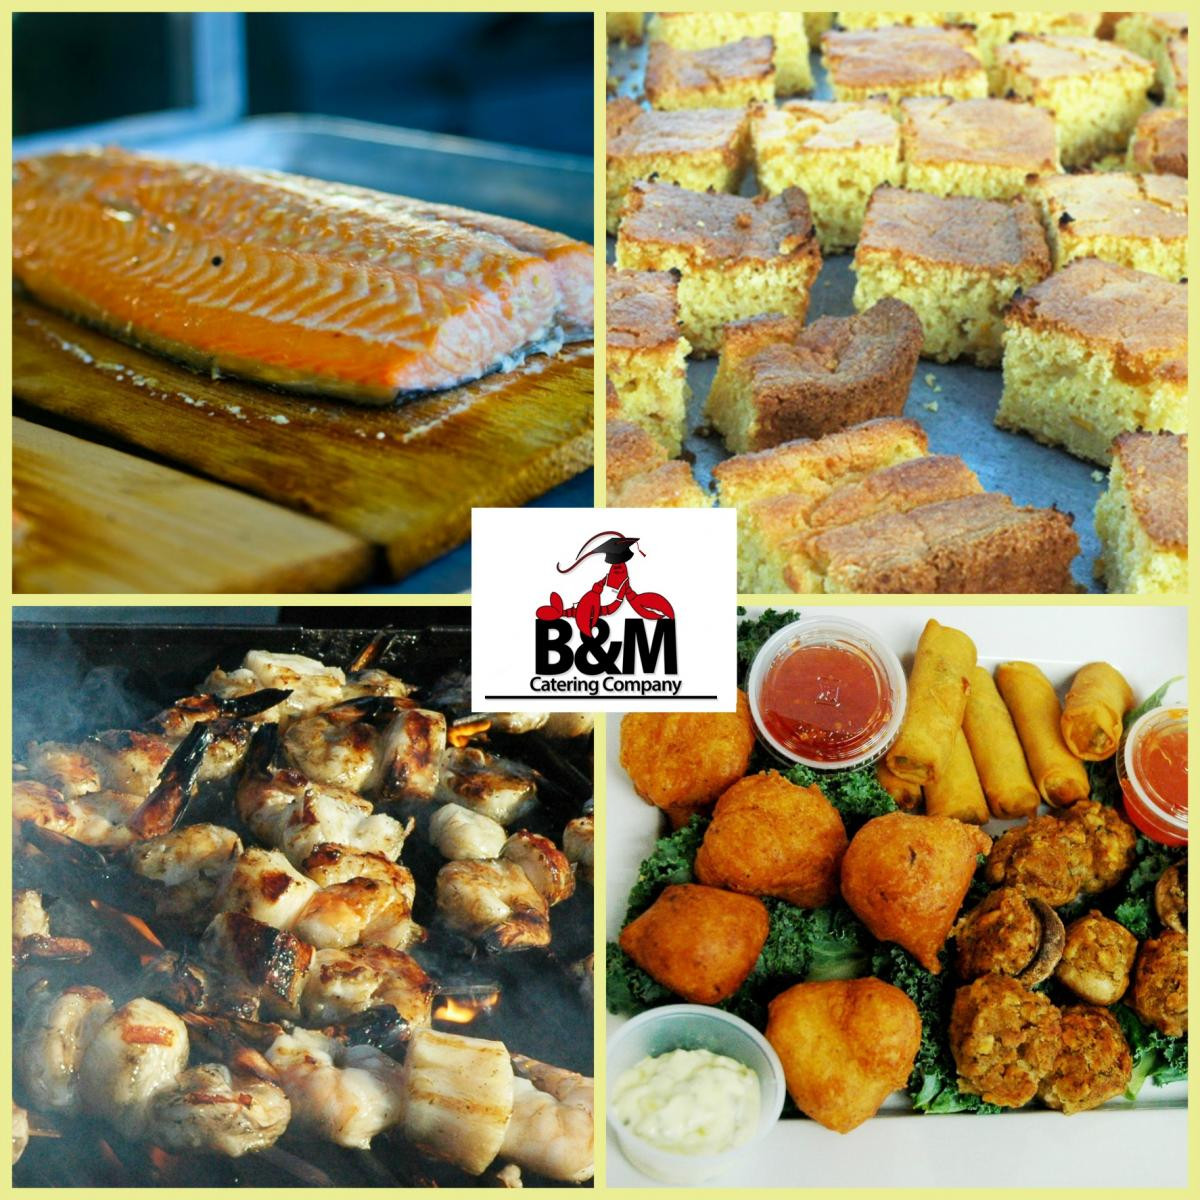 Backyard Graduation Party Menu Ideas
 Graduation Parties Made Easy with B&M Catering